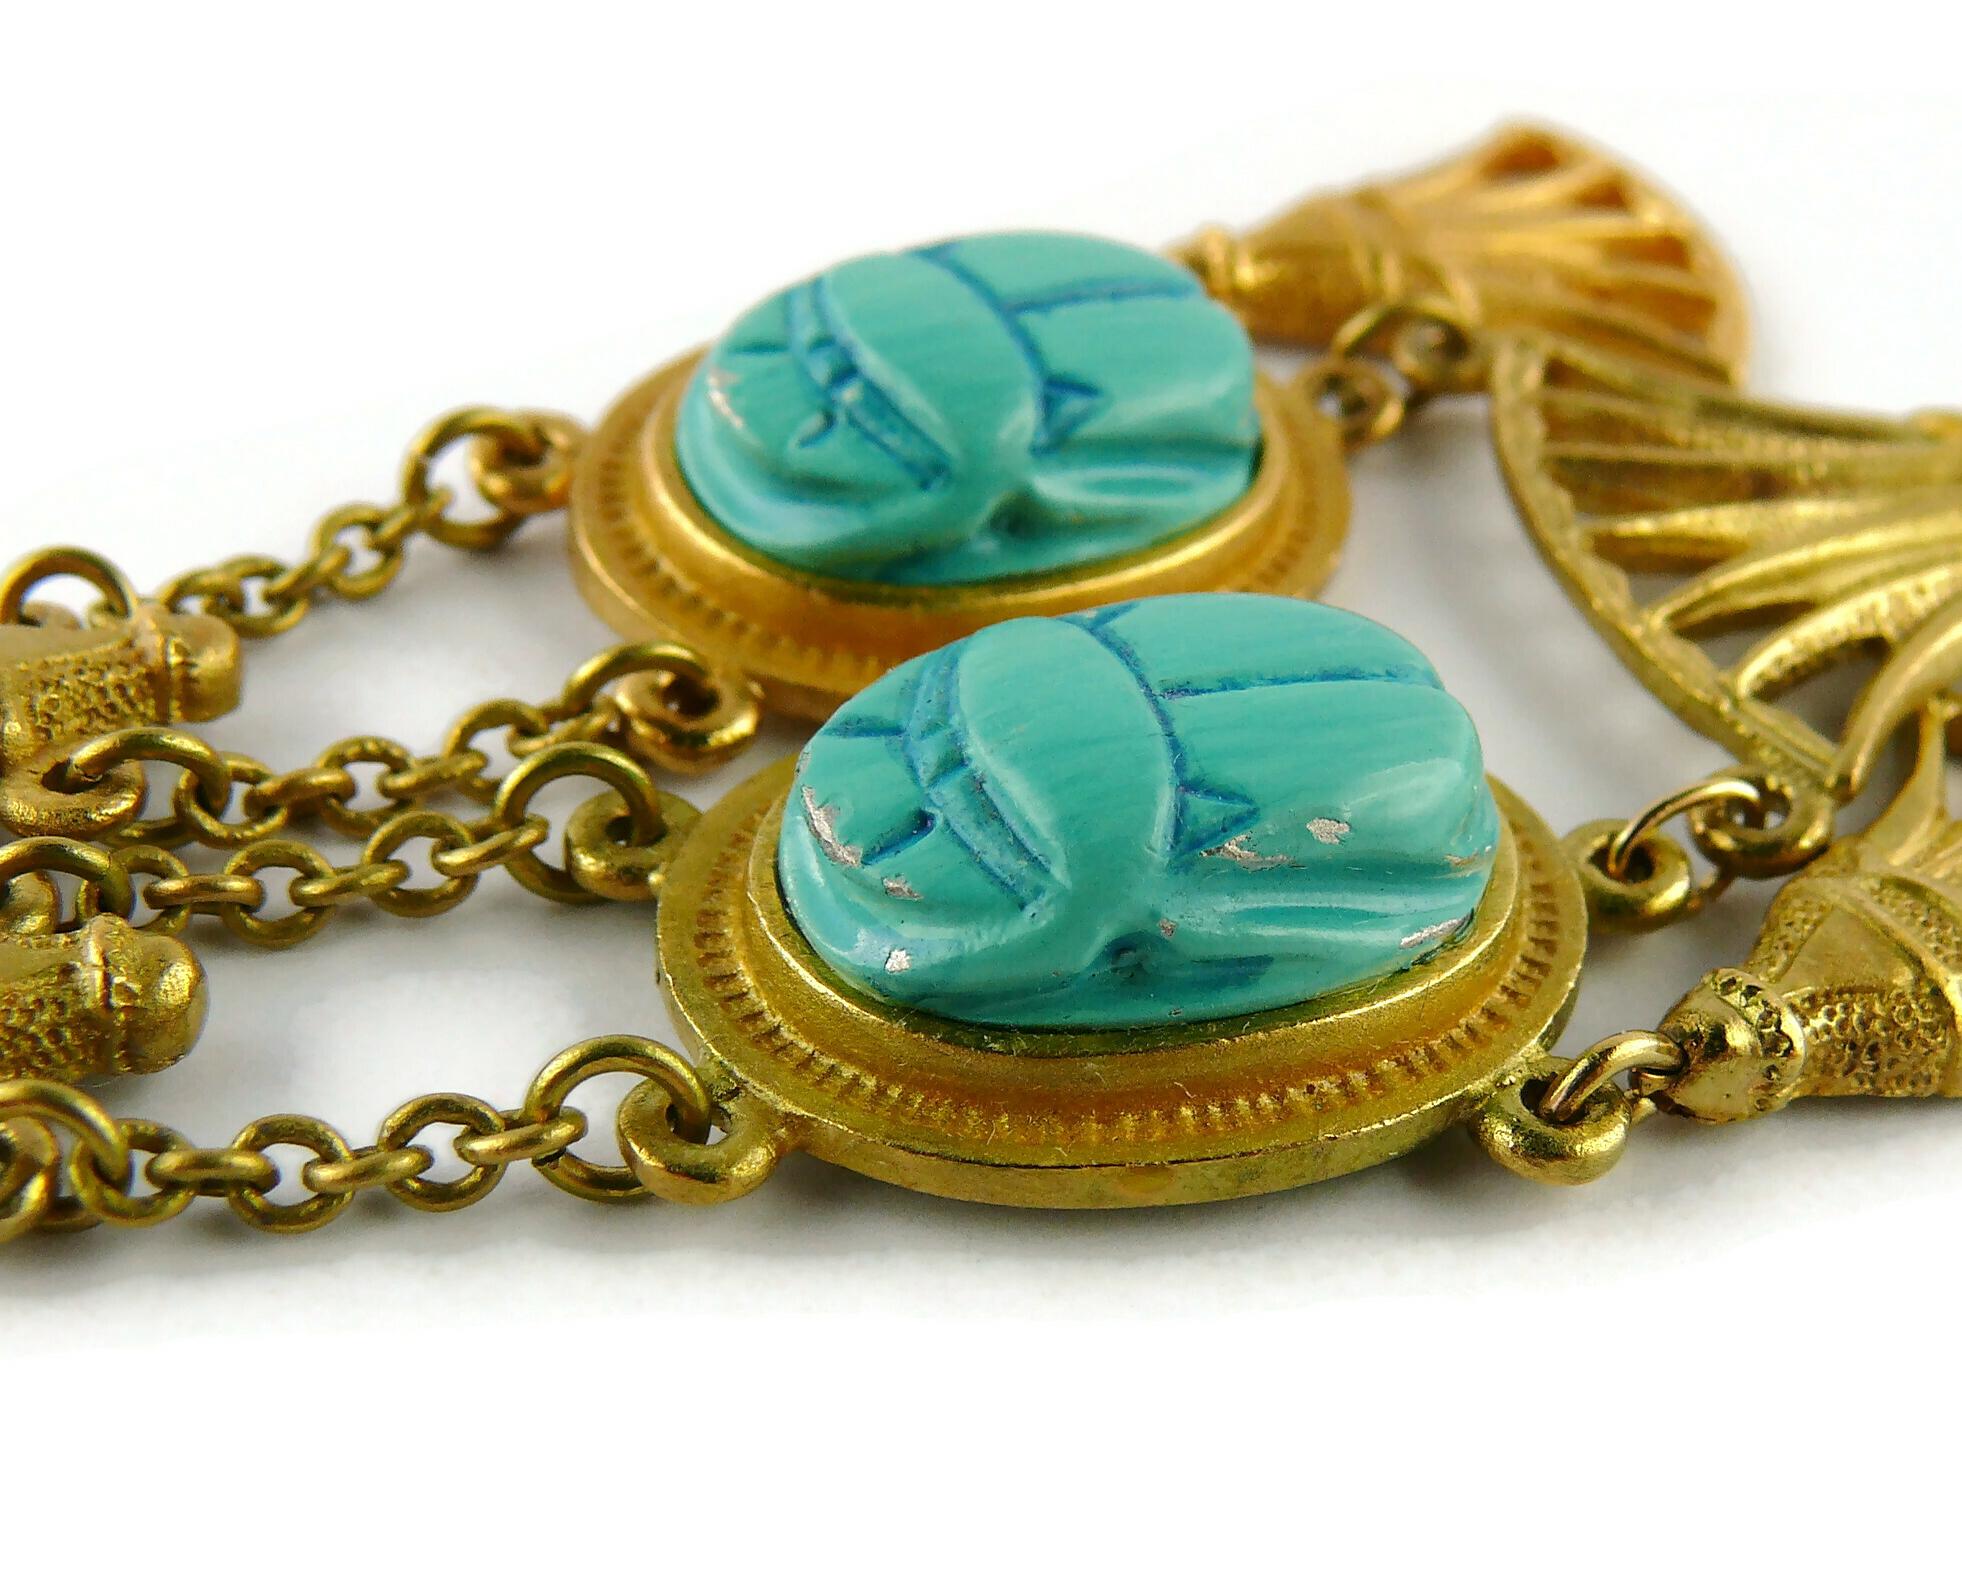 Christian Dior Egyptian Revival Faux Turquoise Scarab Necklace 8